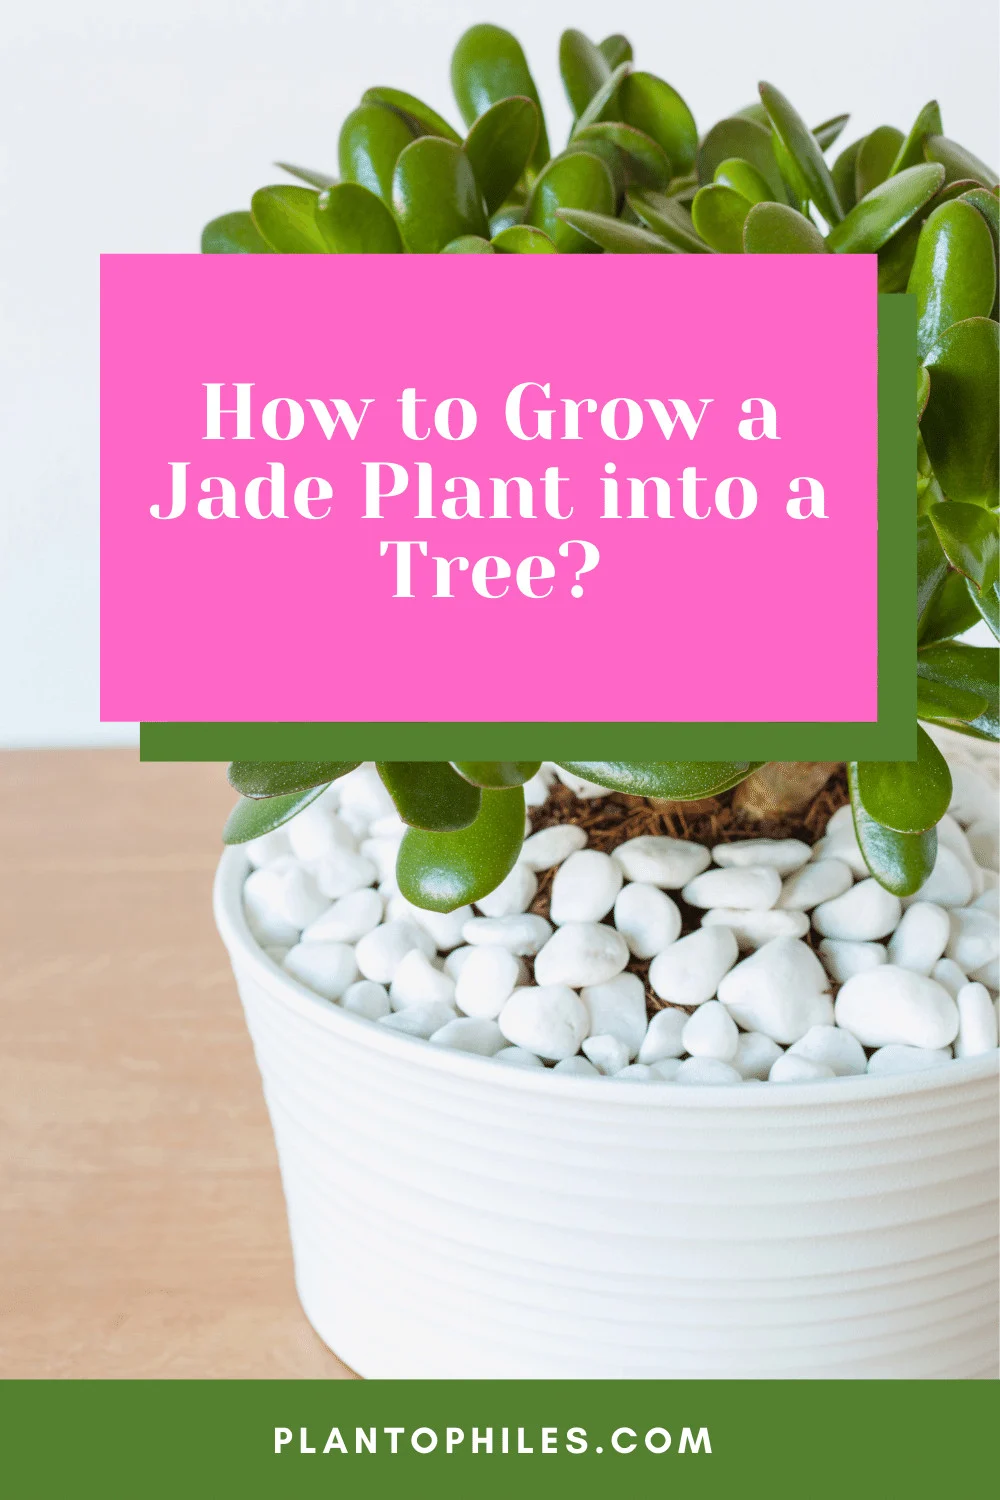 How to Grow a Jade Plant into a Tree?